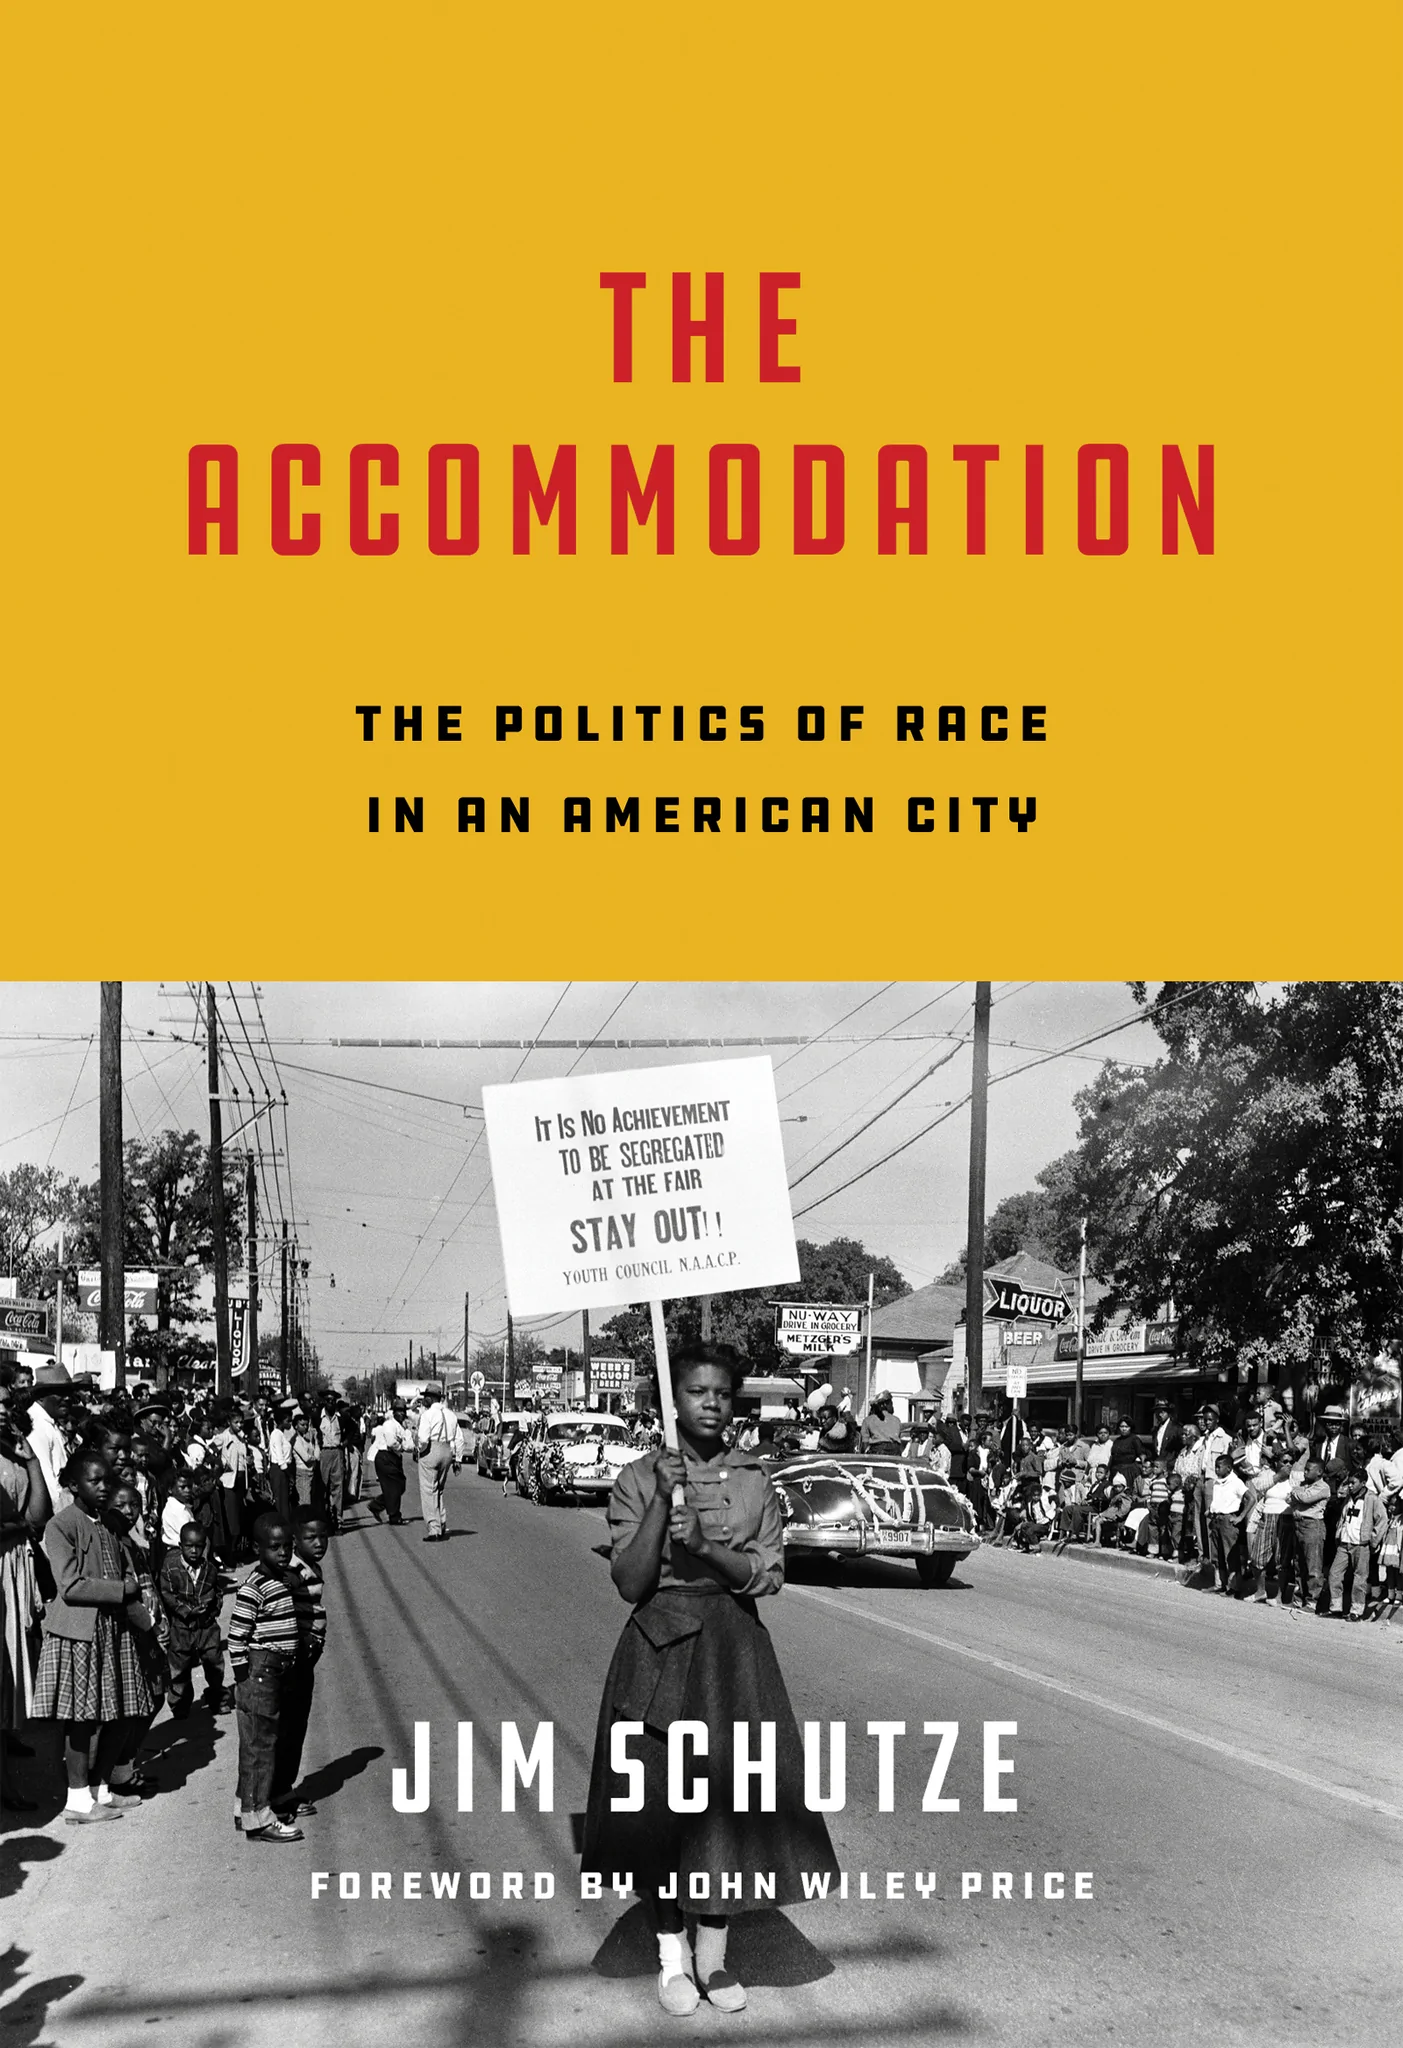 Cover image of the book, The Accommodation: The Politics of Race in an American City by Jim Schutze. It shows an image of a person holding a sign that says "It is no achievement to be segregated at the fair/Stay Out!/ Youth Council NAACP"